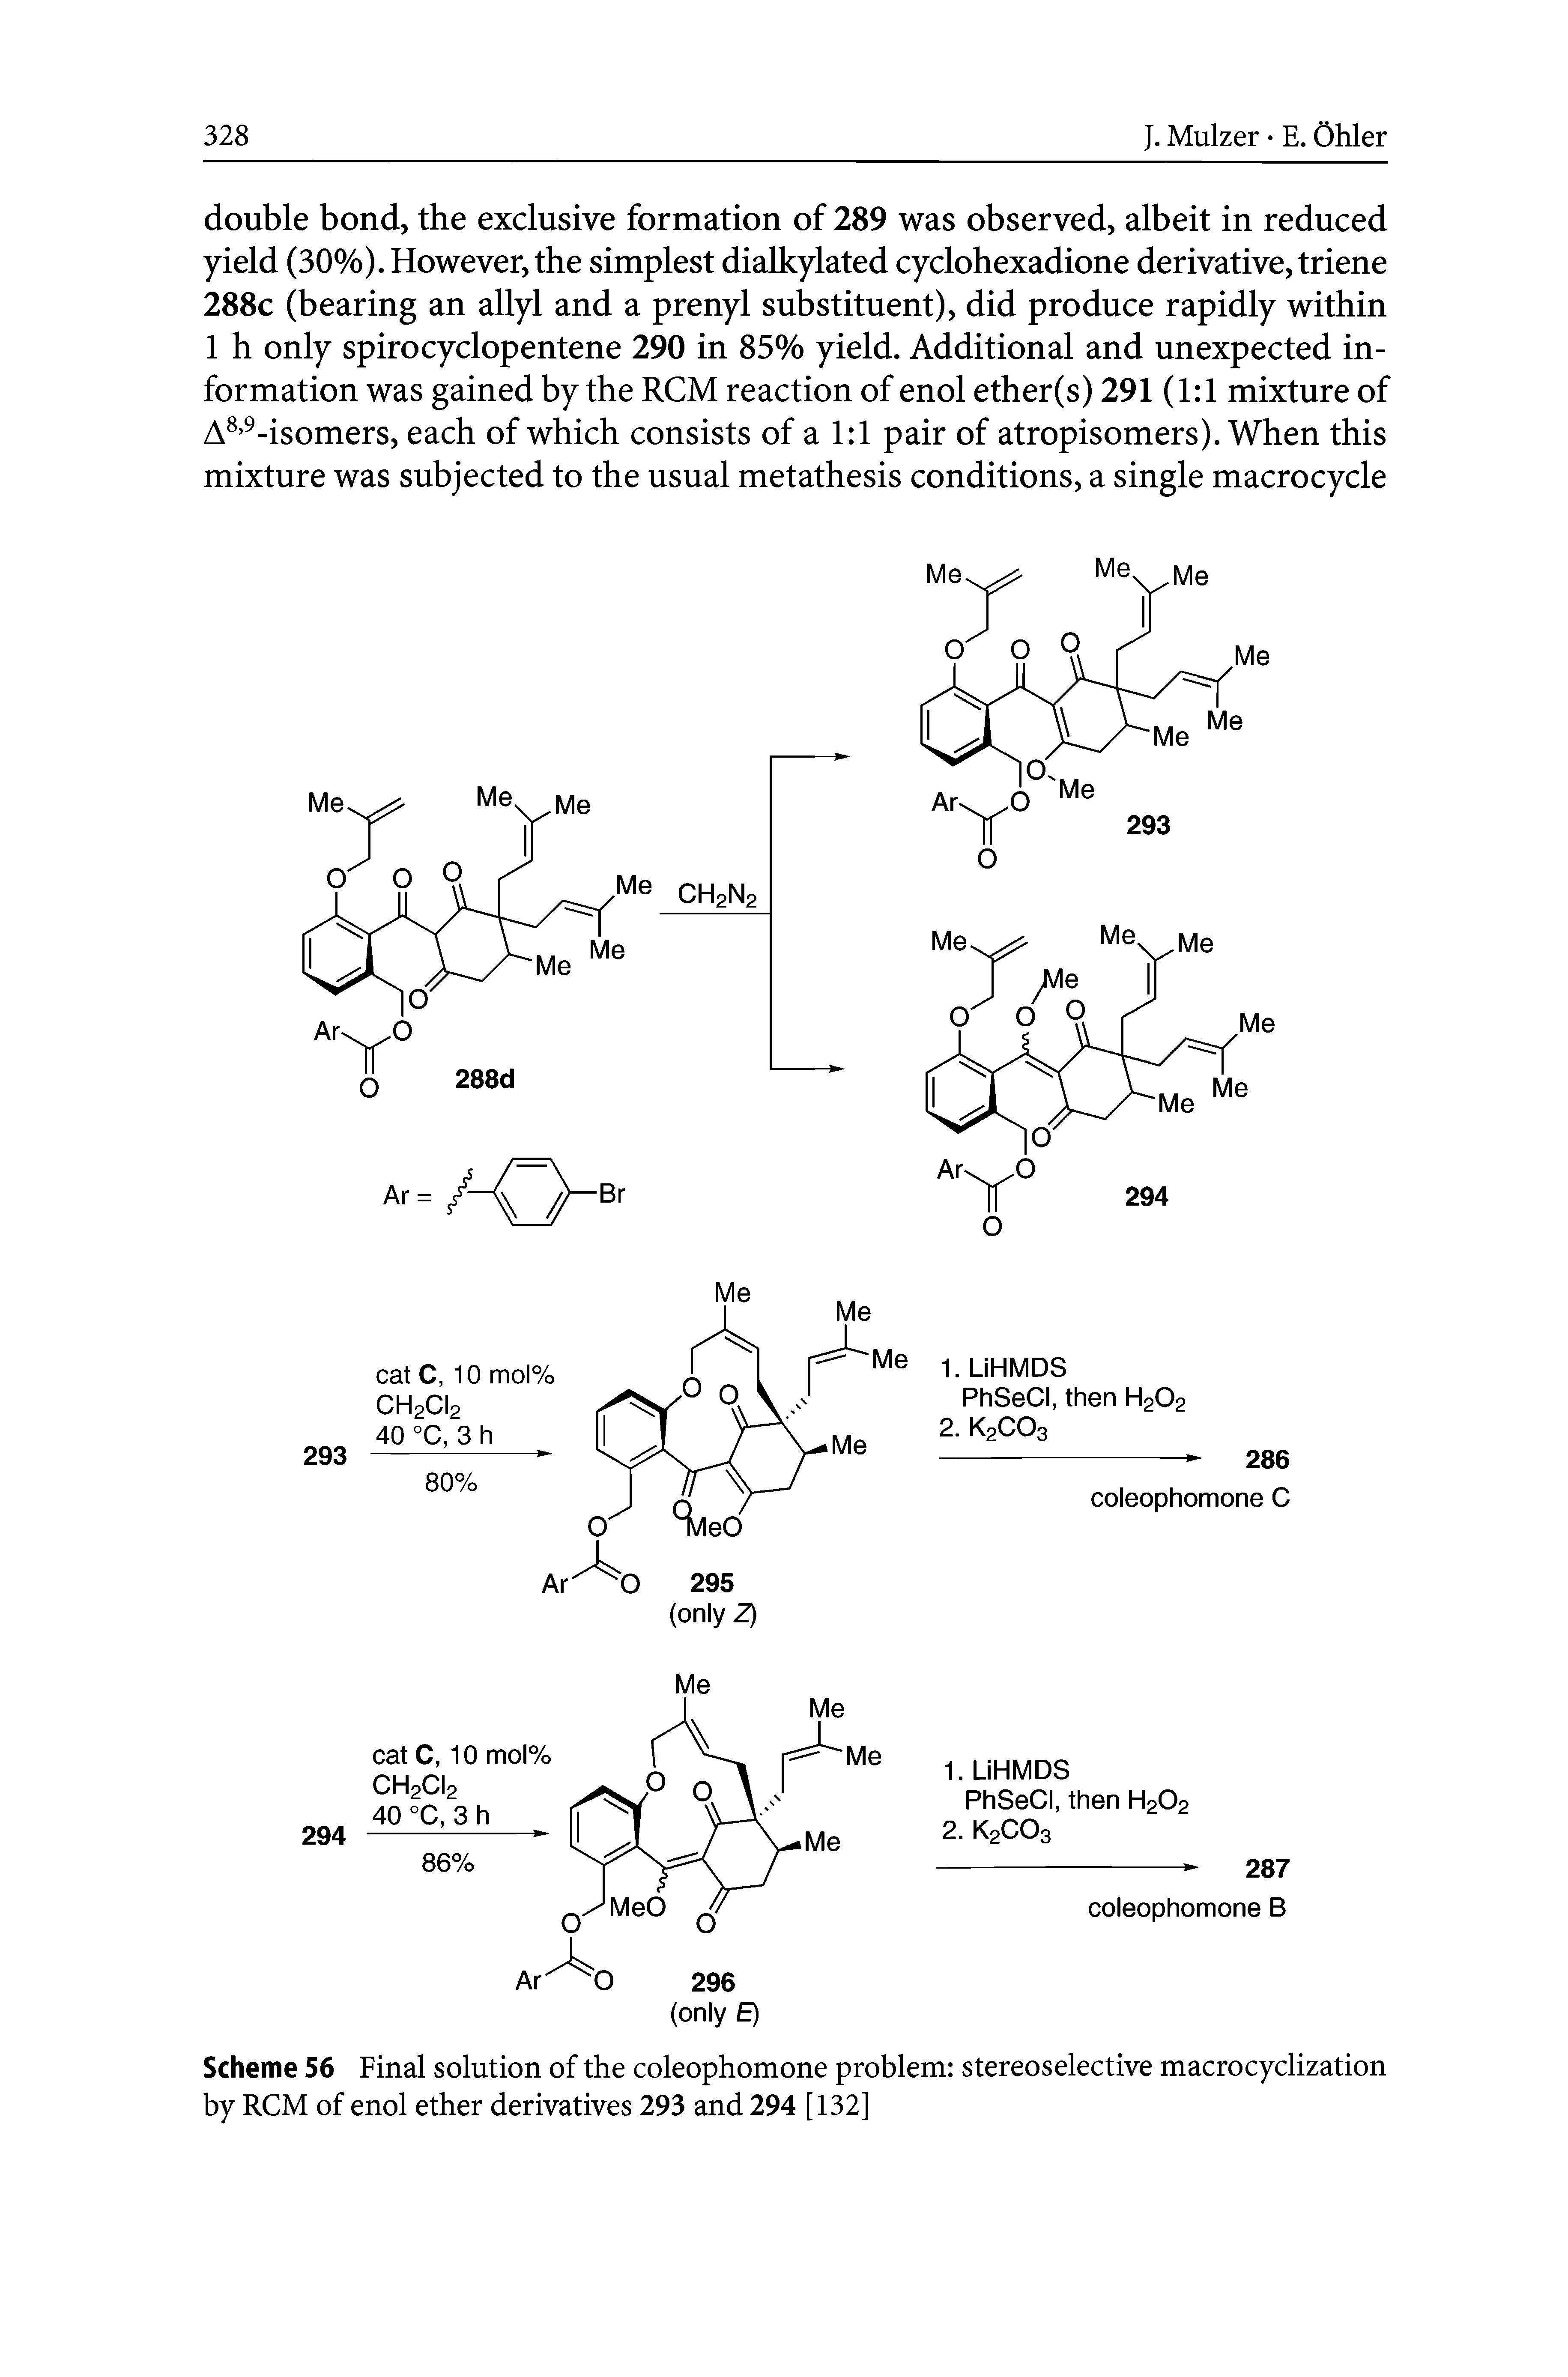 Scheme 56 Final solution of the coleophomone problem stereoselective macrocyclization by RCM of enol ether derivatives 293 and 294 [132]...